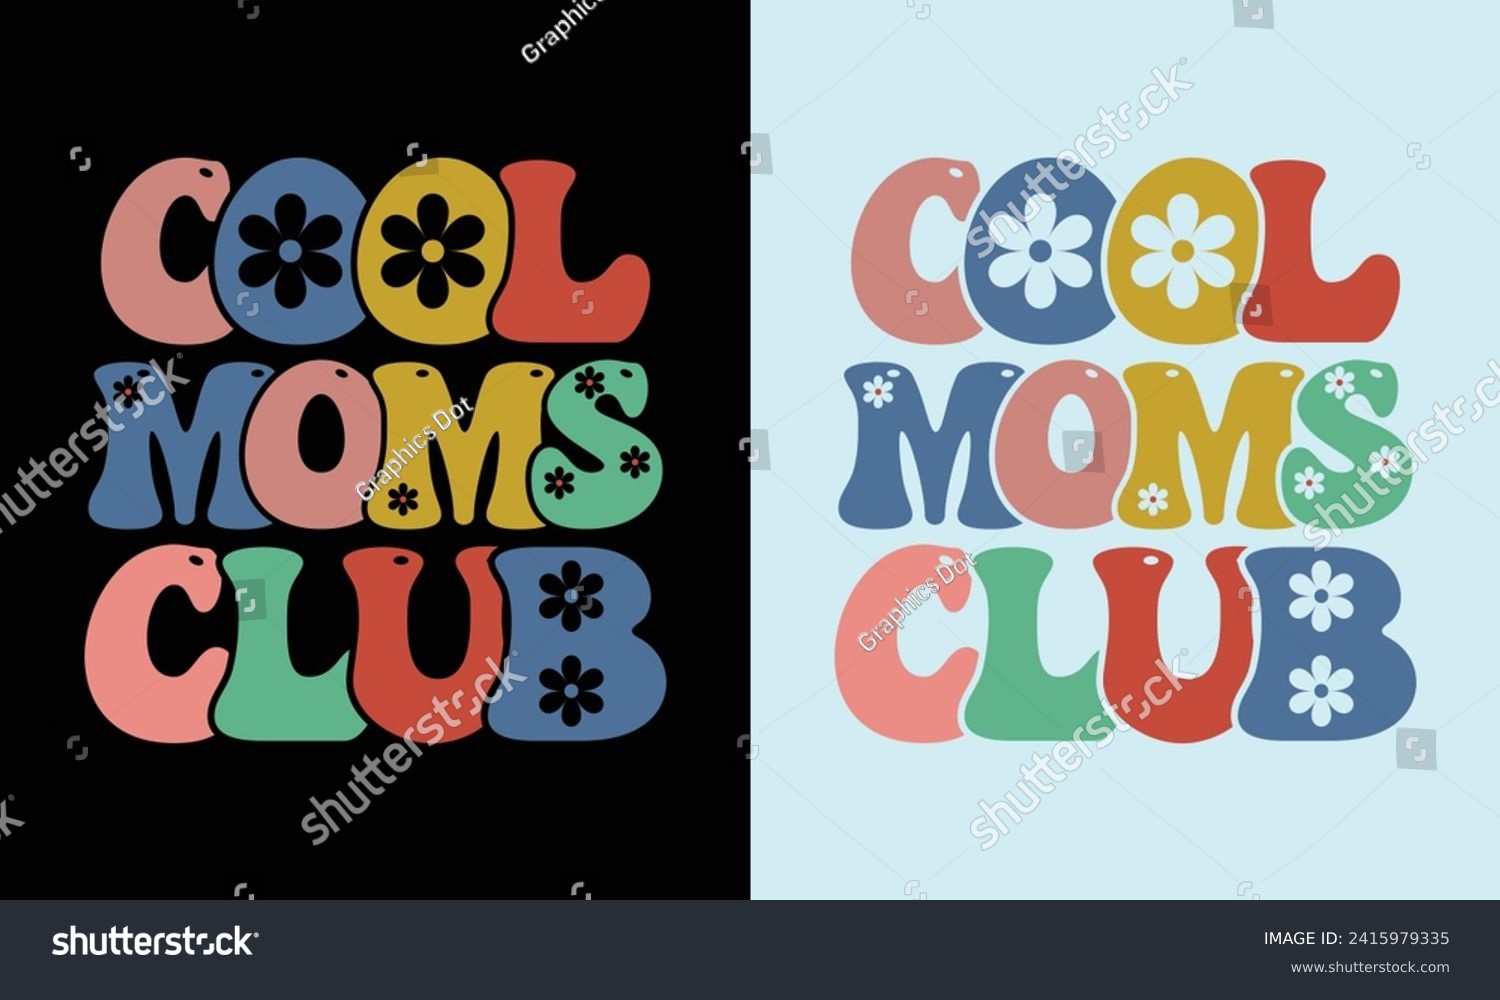 SVG of Cool Moms Club Retro Design,Cool moms club quote retro wavy colorful Design,Best Mom Day Design,gift, lover,Mom Cut File,Happy Mother's Day Design svg